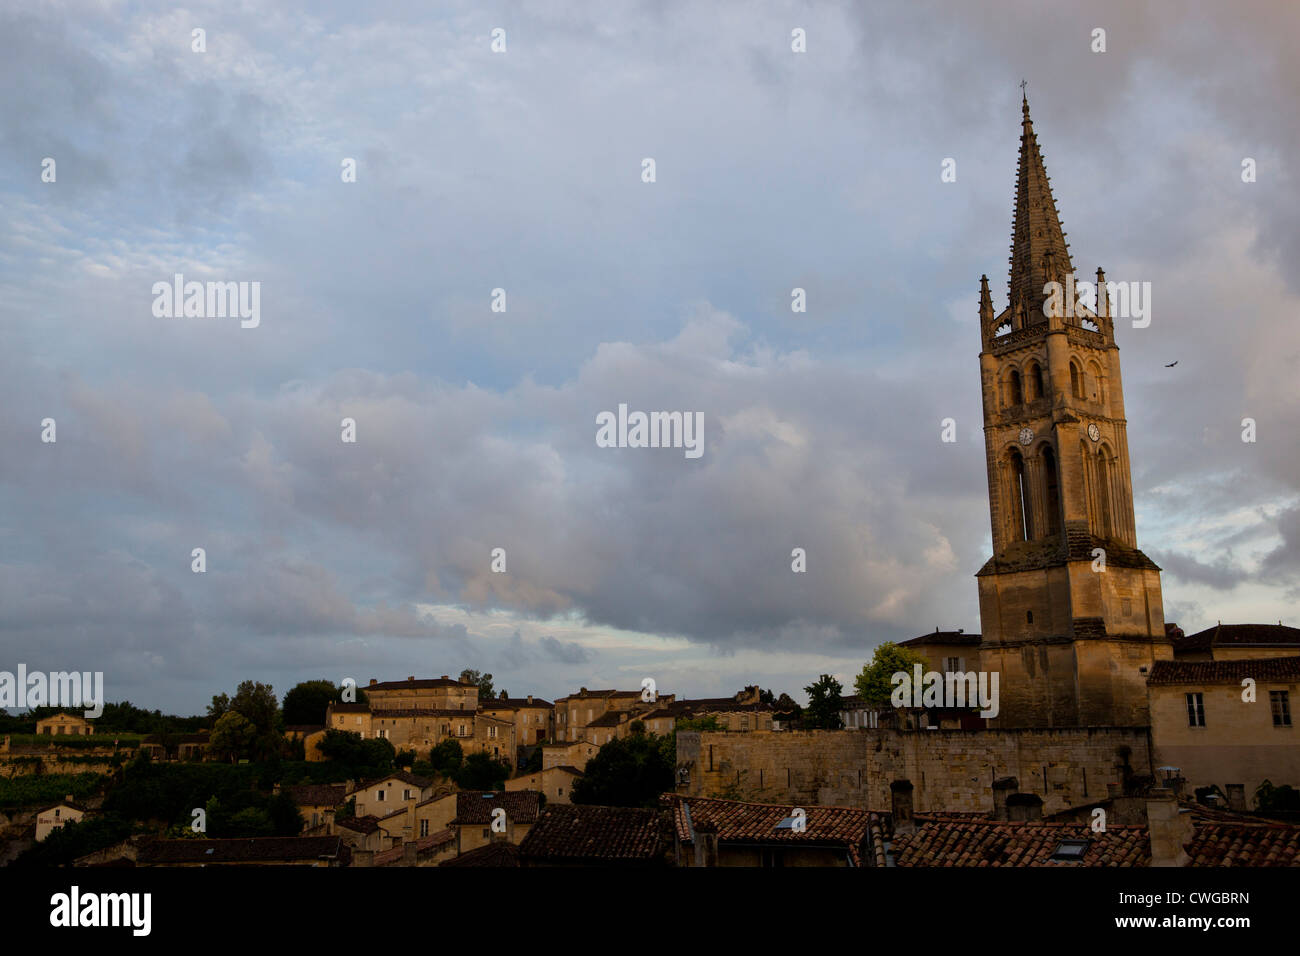 The Saint Emilion Monolithic Church taken from a lookout point in Saint Emilion, Southern France Stock Photo